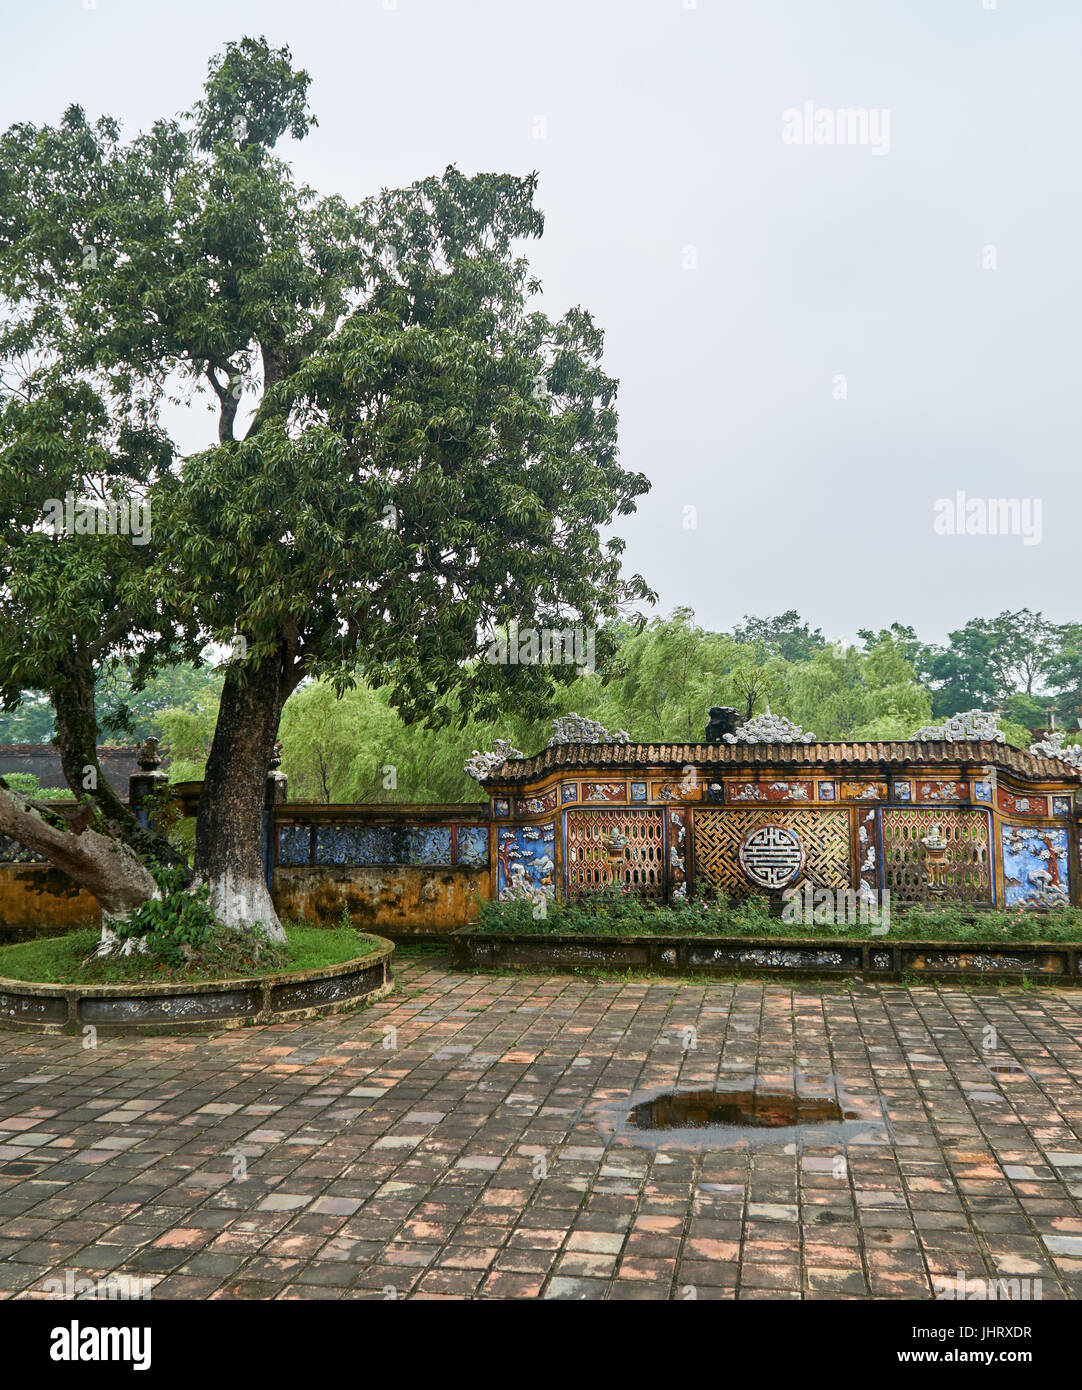 Square or plaza in Hue, Vietnam, on a foggy day. Stock Photo